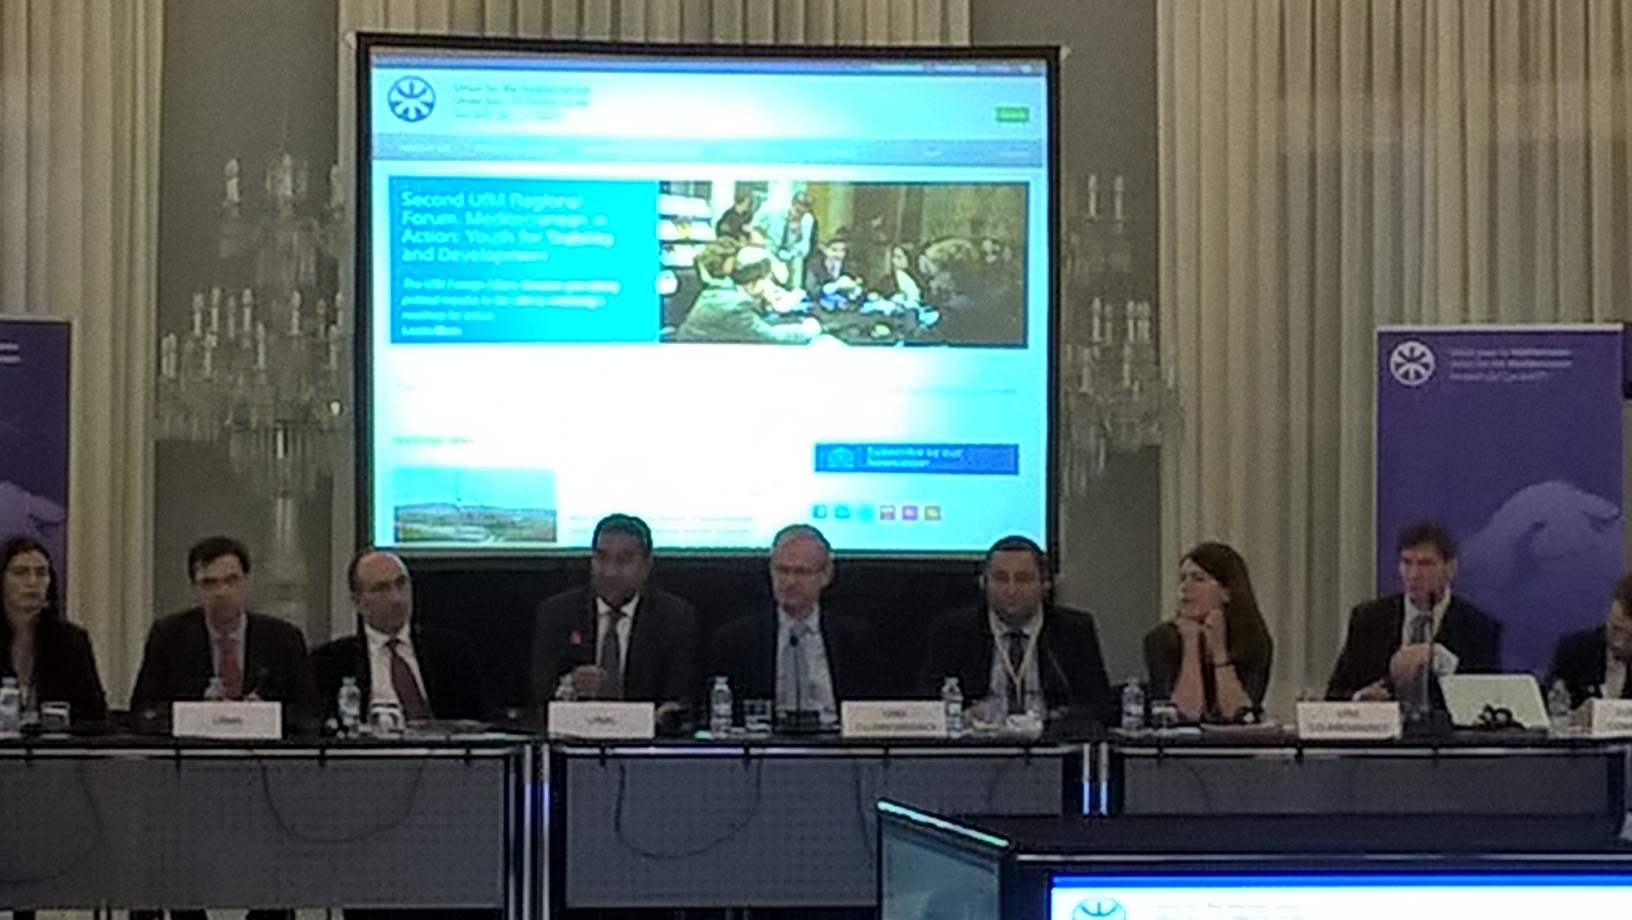 UfM Working Group meeting addressed actions on environmental and climate change in the Mediterranean – 14&15 March 2017 Barcelona.